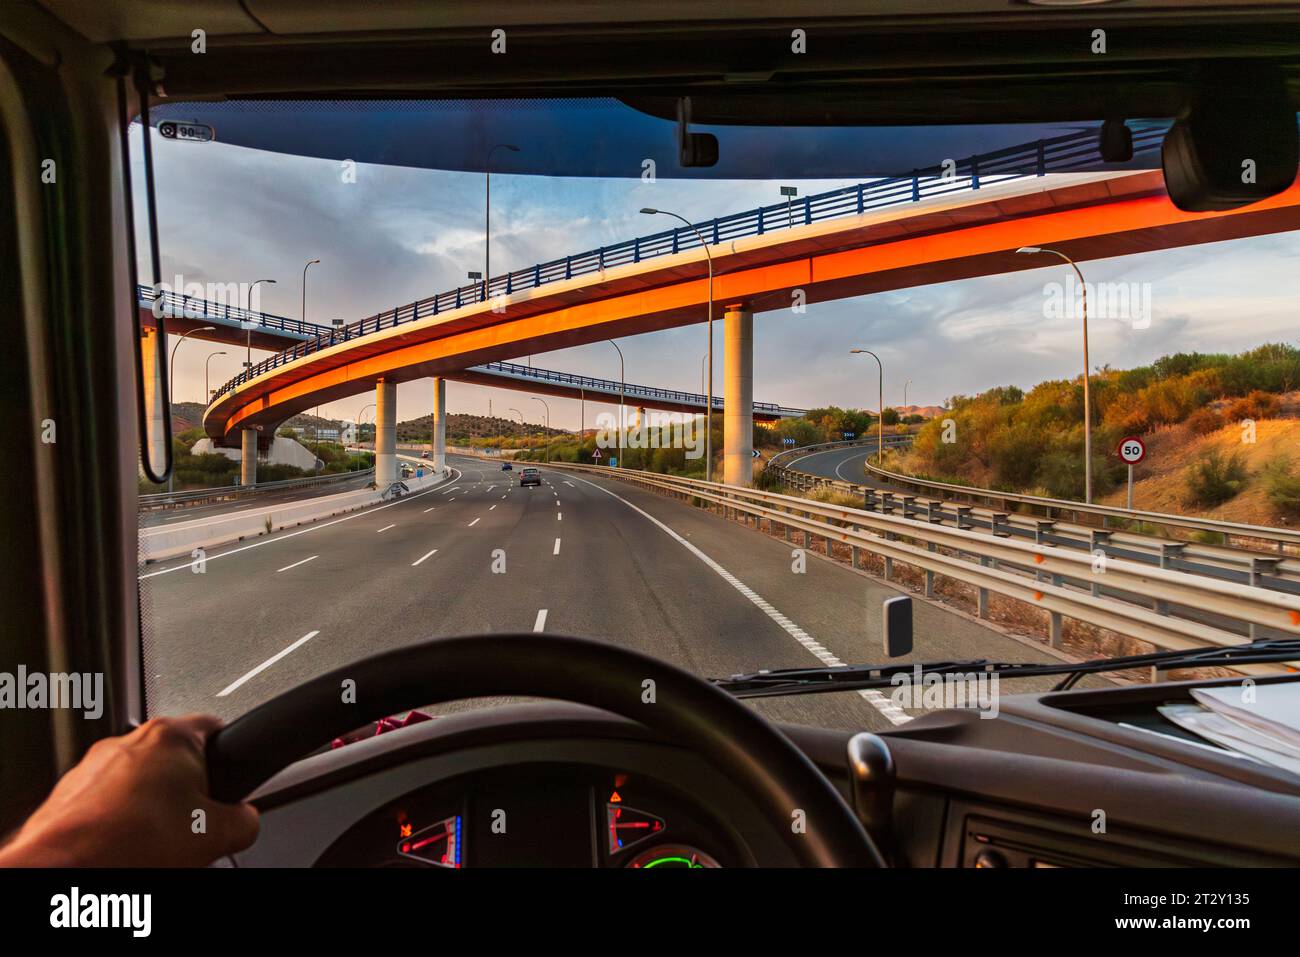 View from the driving position of a truck of a highway with several bridges at different levels. Stock Photo